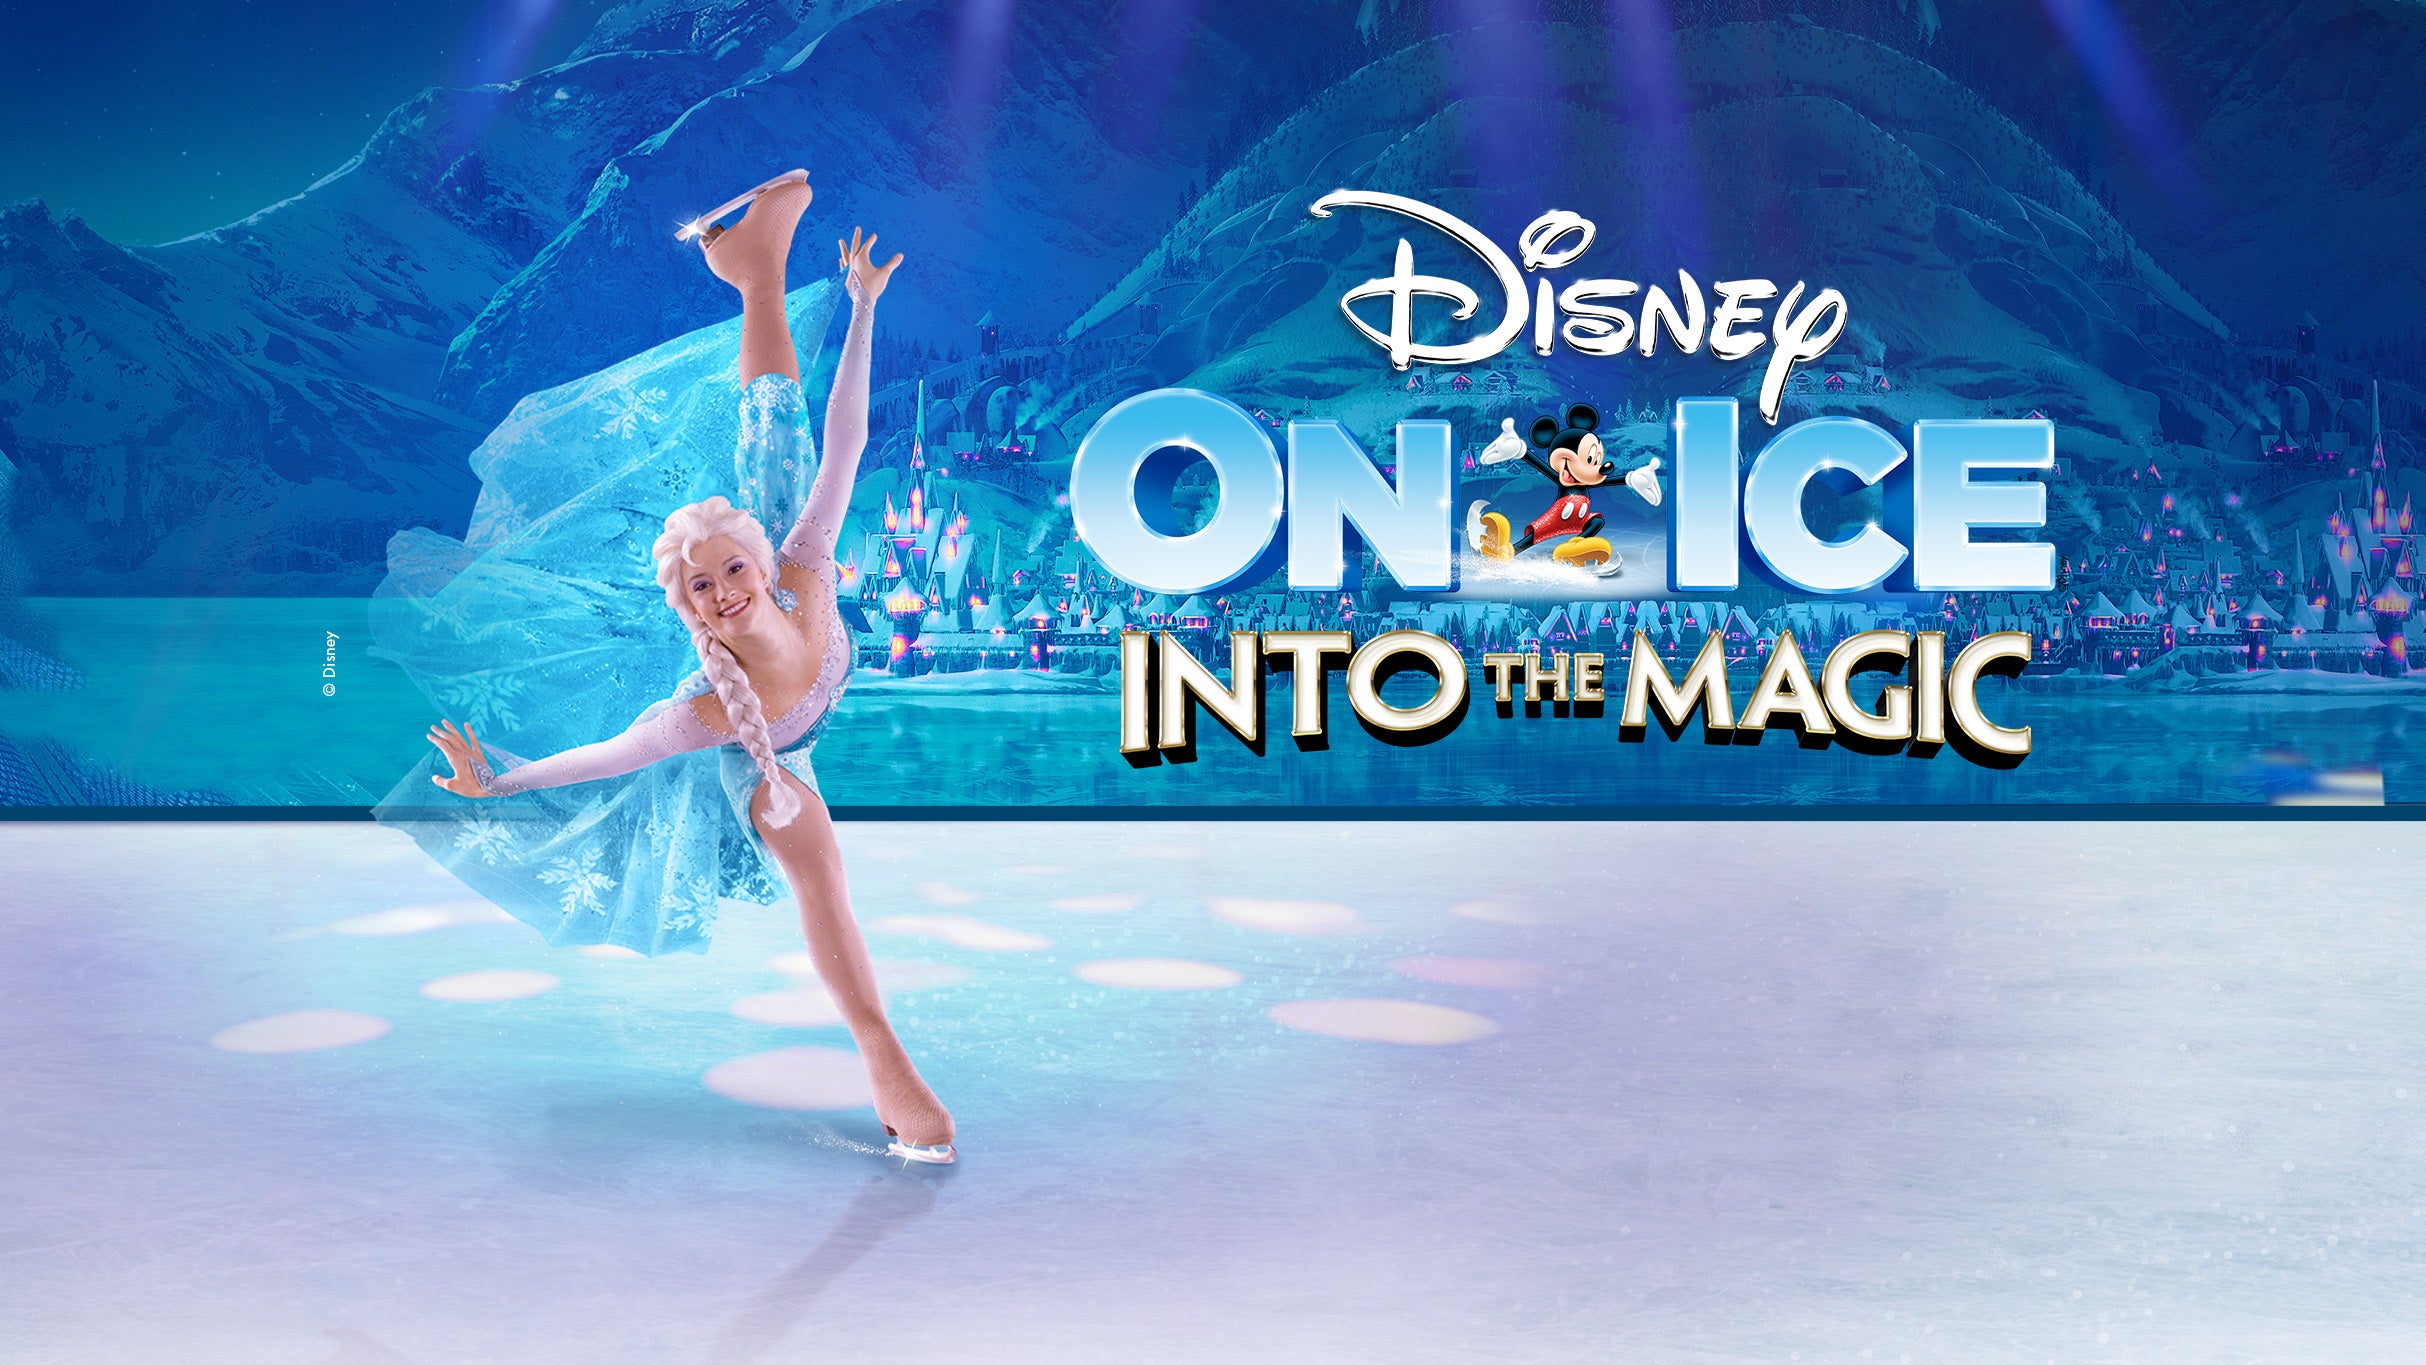 Disney On Ice presents Into the Magic in Johnstown promo photo for Feld Preferred presale offer code